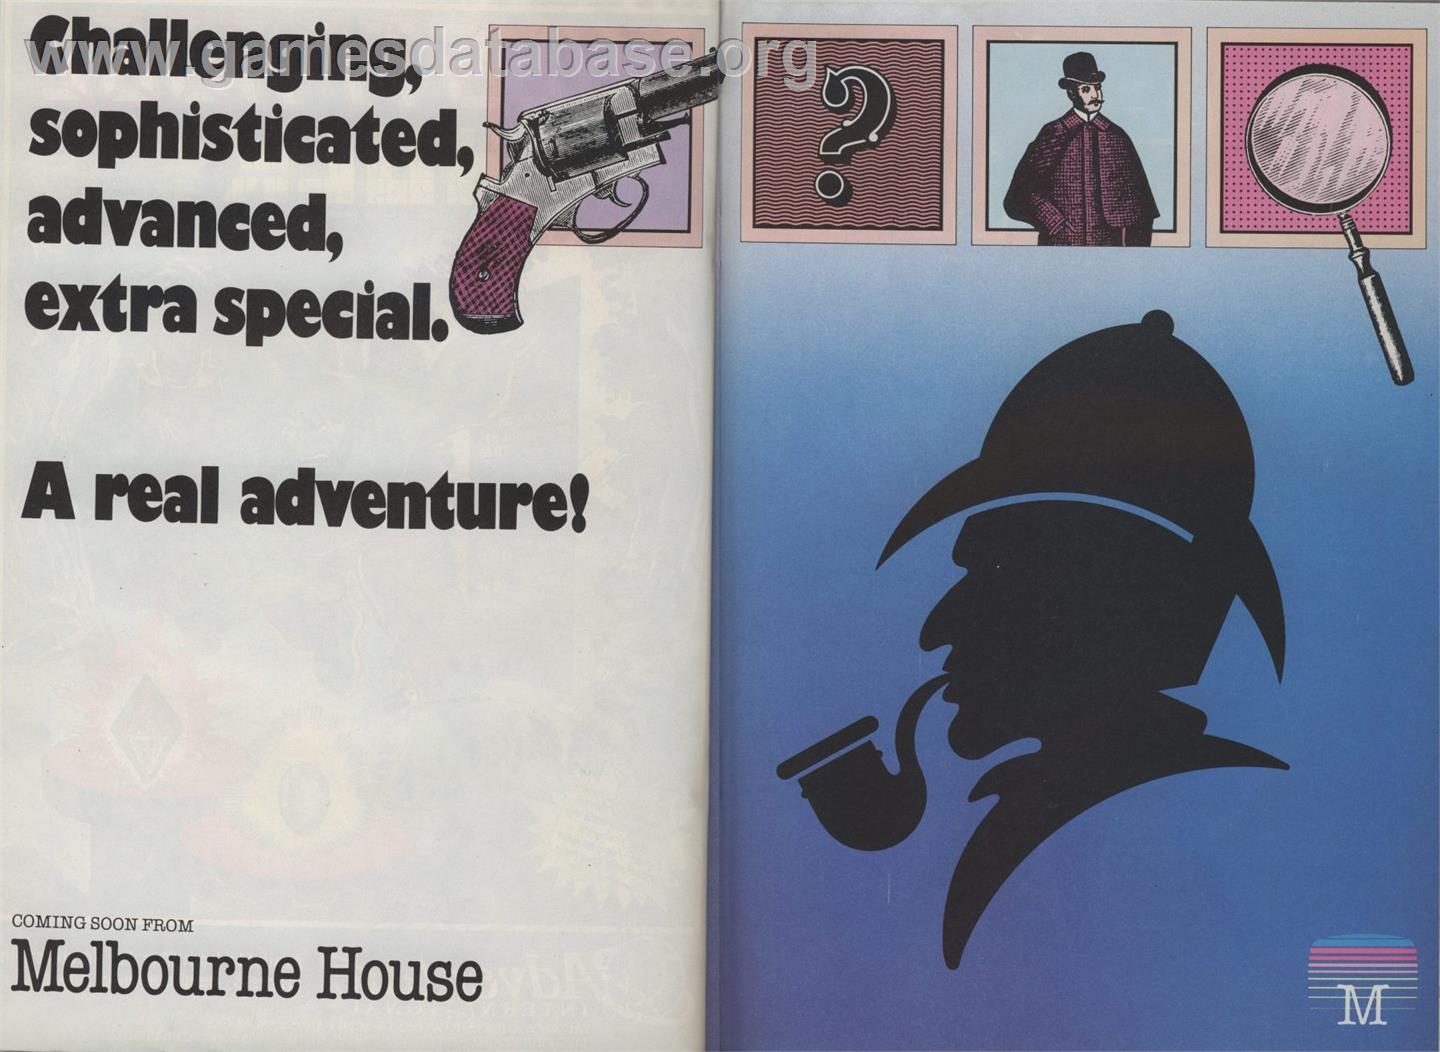 Sherlock: The Riddle of the Crown Jewels - Commodore Amiga - Artwork - Advert